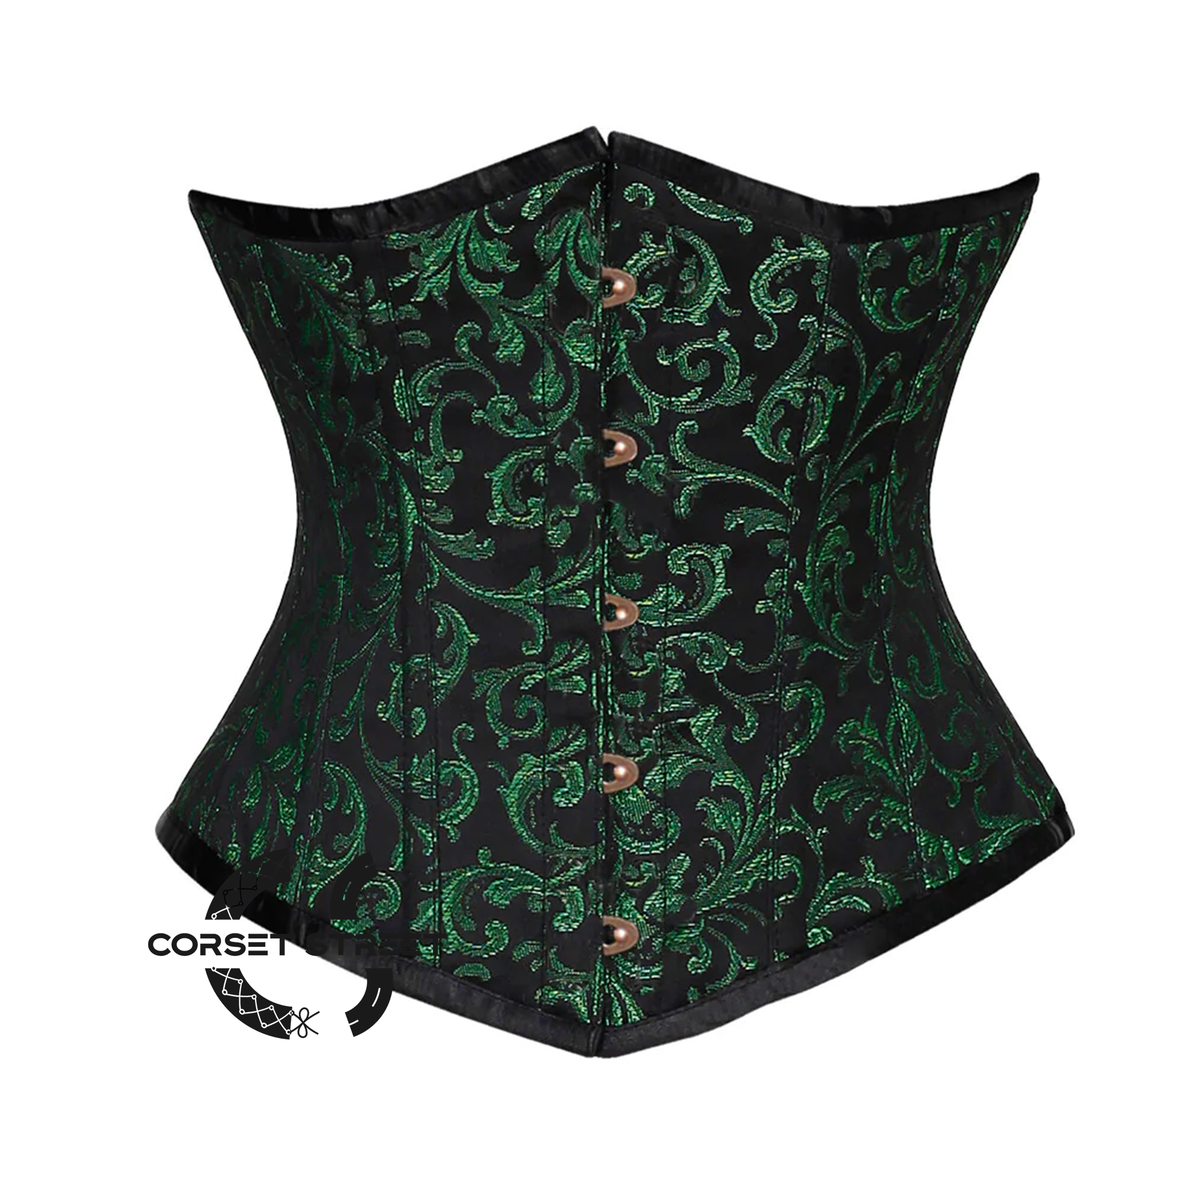 Green And Black Brocade With Front Antique Busk Underbust Corset Gothic Costume Bustier Top